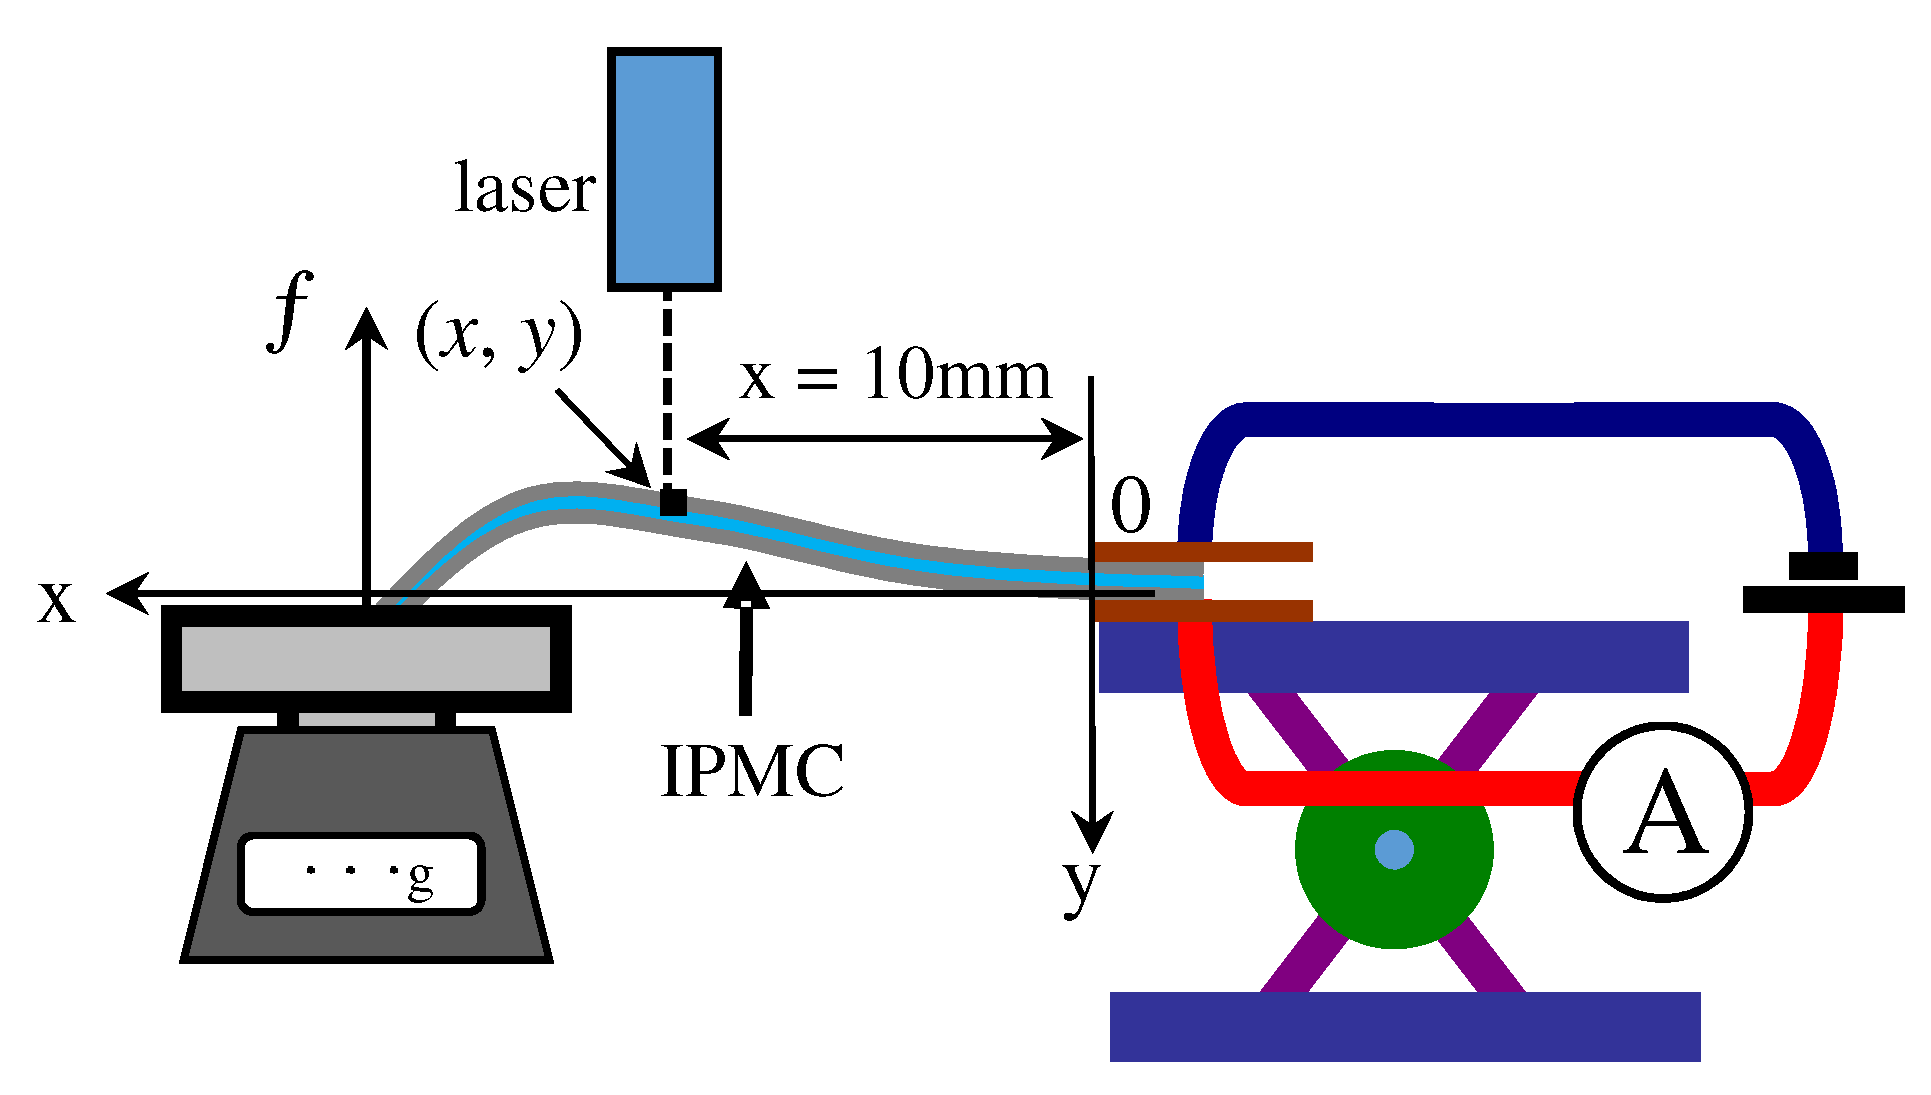 Fixed-free Bending Configuration of an IPMC Actuator for an Input